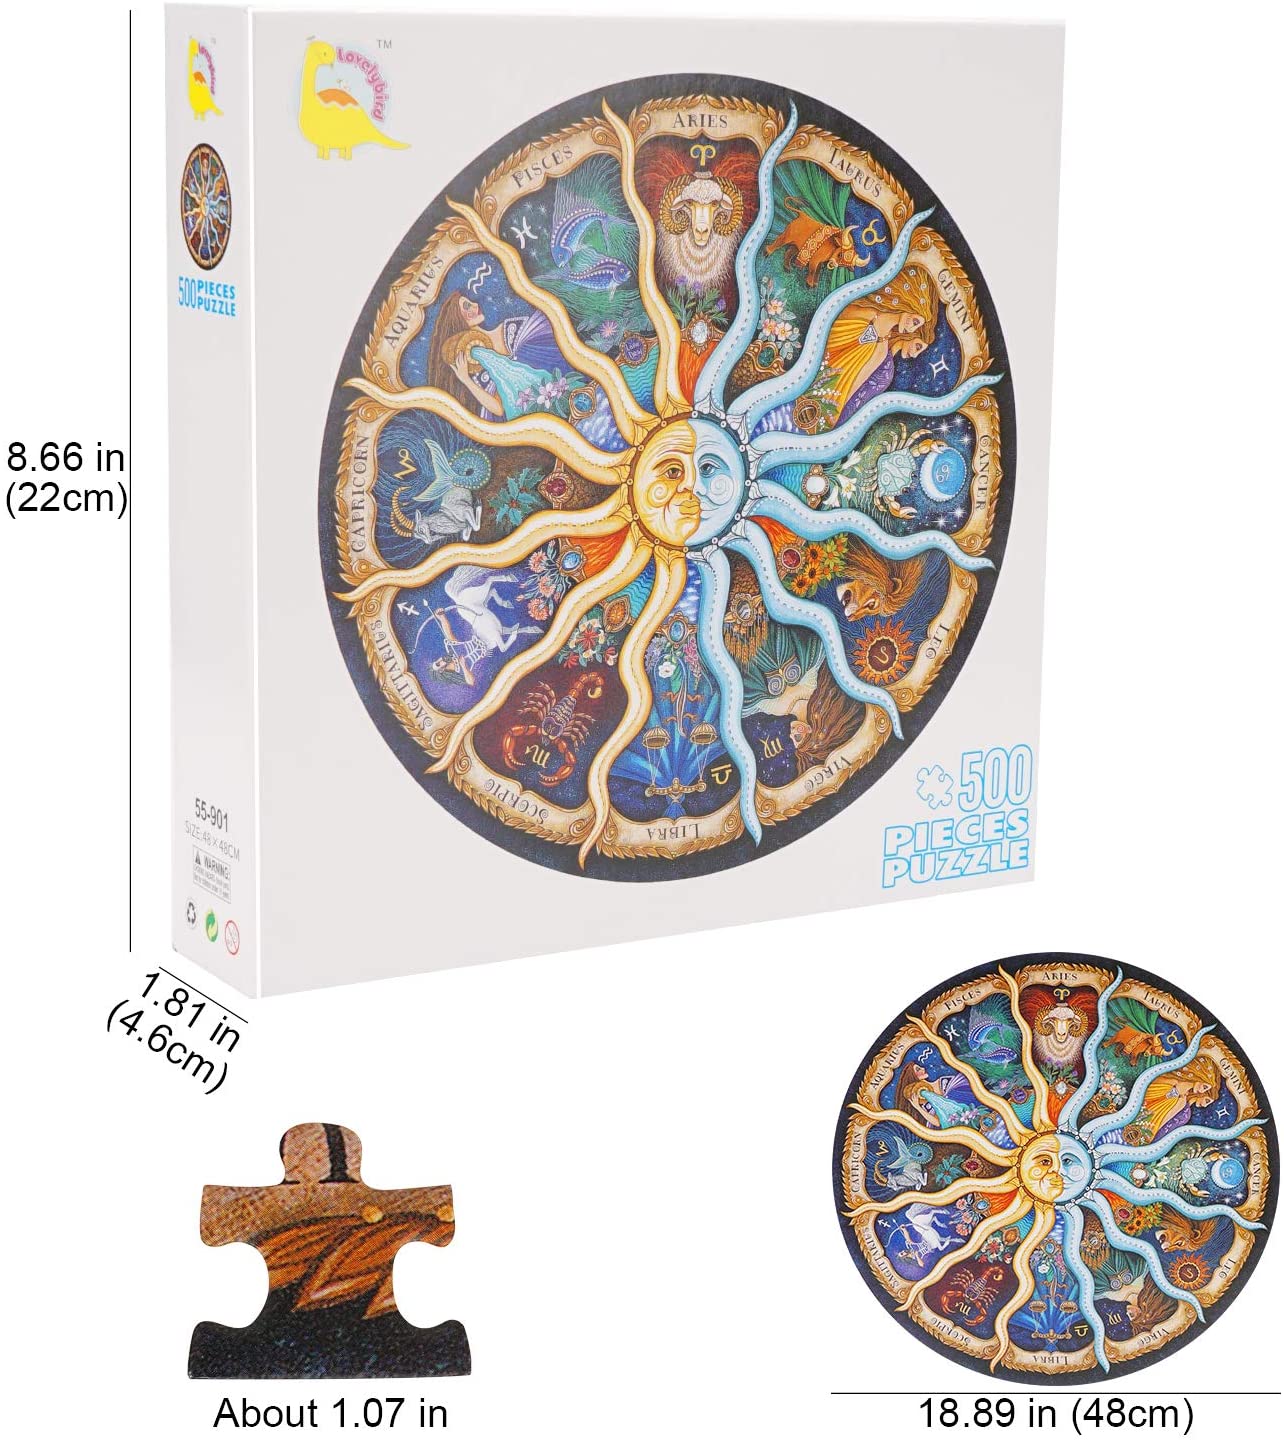 500 Pieces Round Jigsaw Puzzle for Adults and Kids